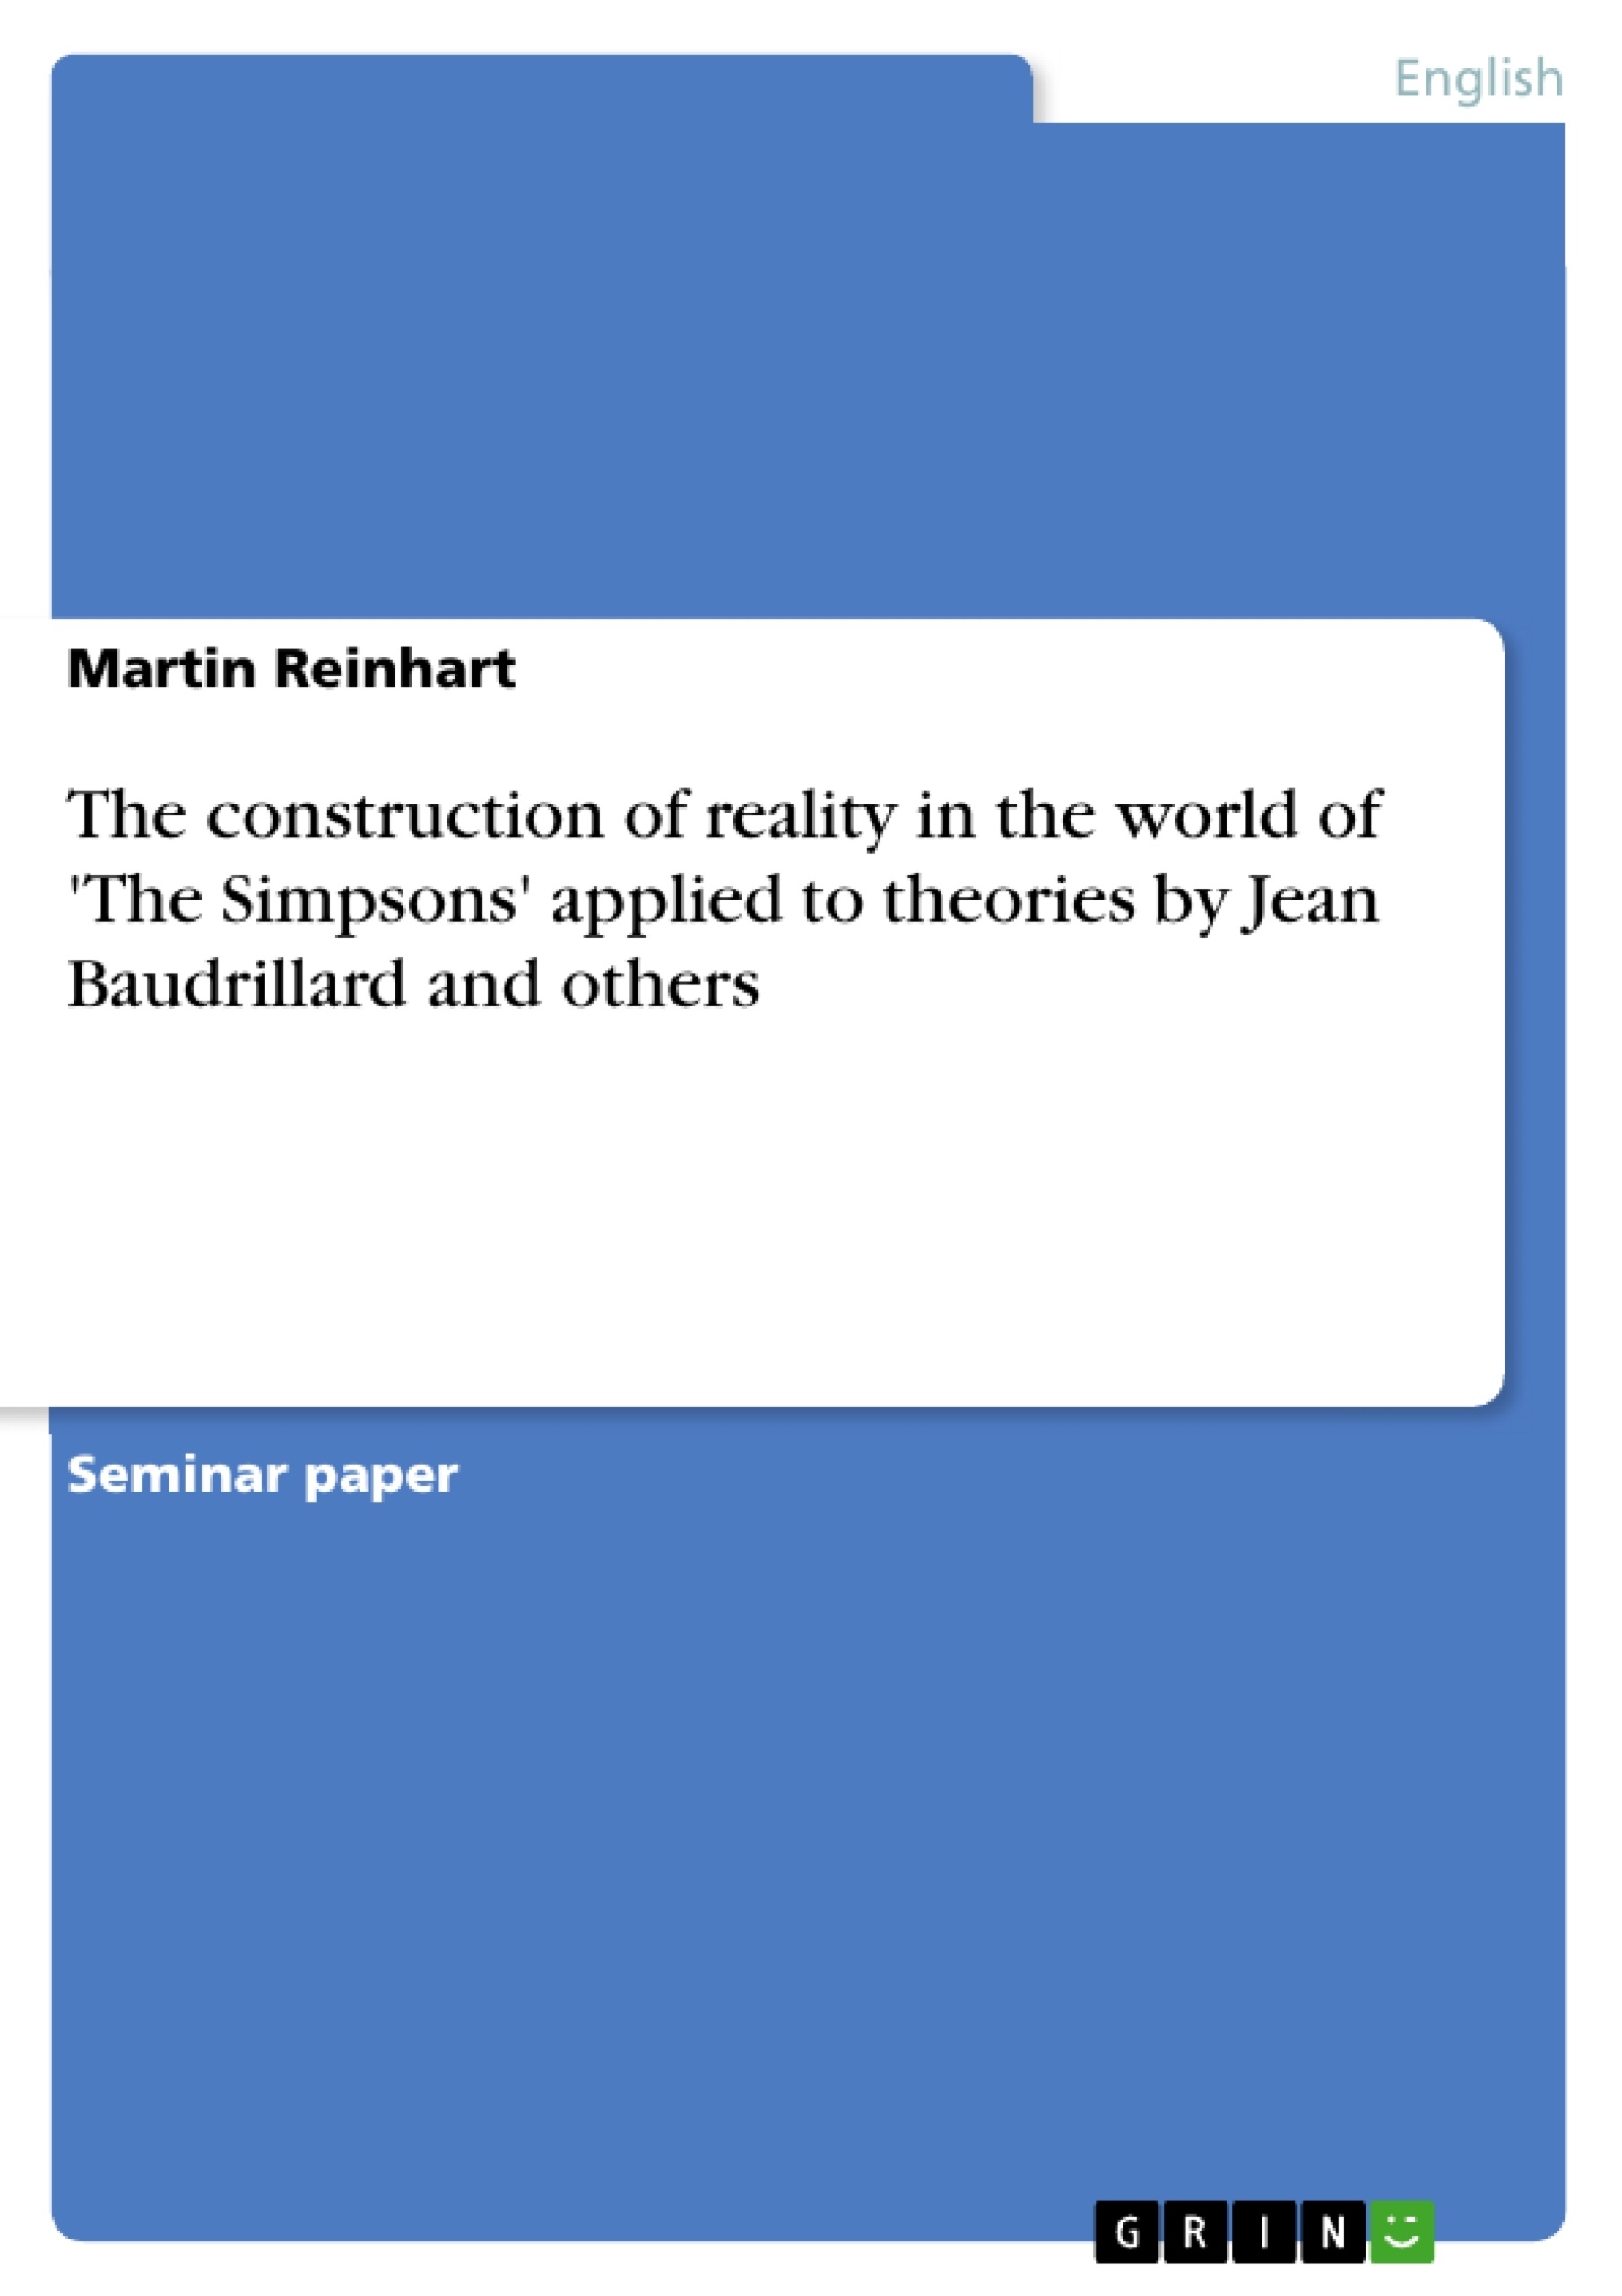 Título: The construction of reality in the world of 'The Simpsons' applied to theories by Jean Baudrillard and others